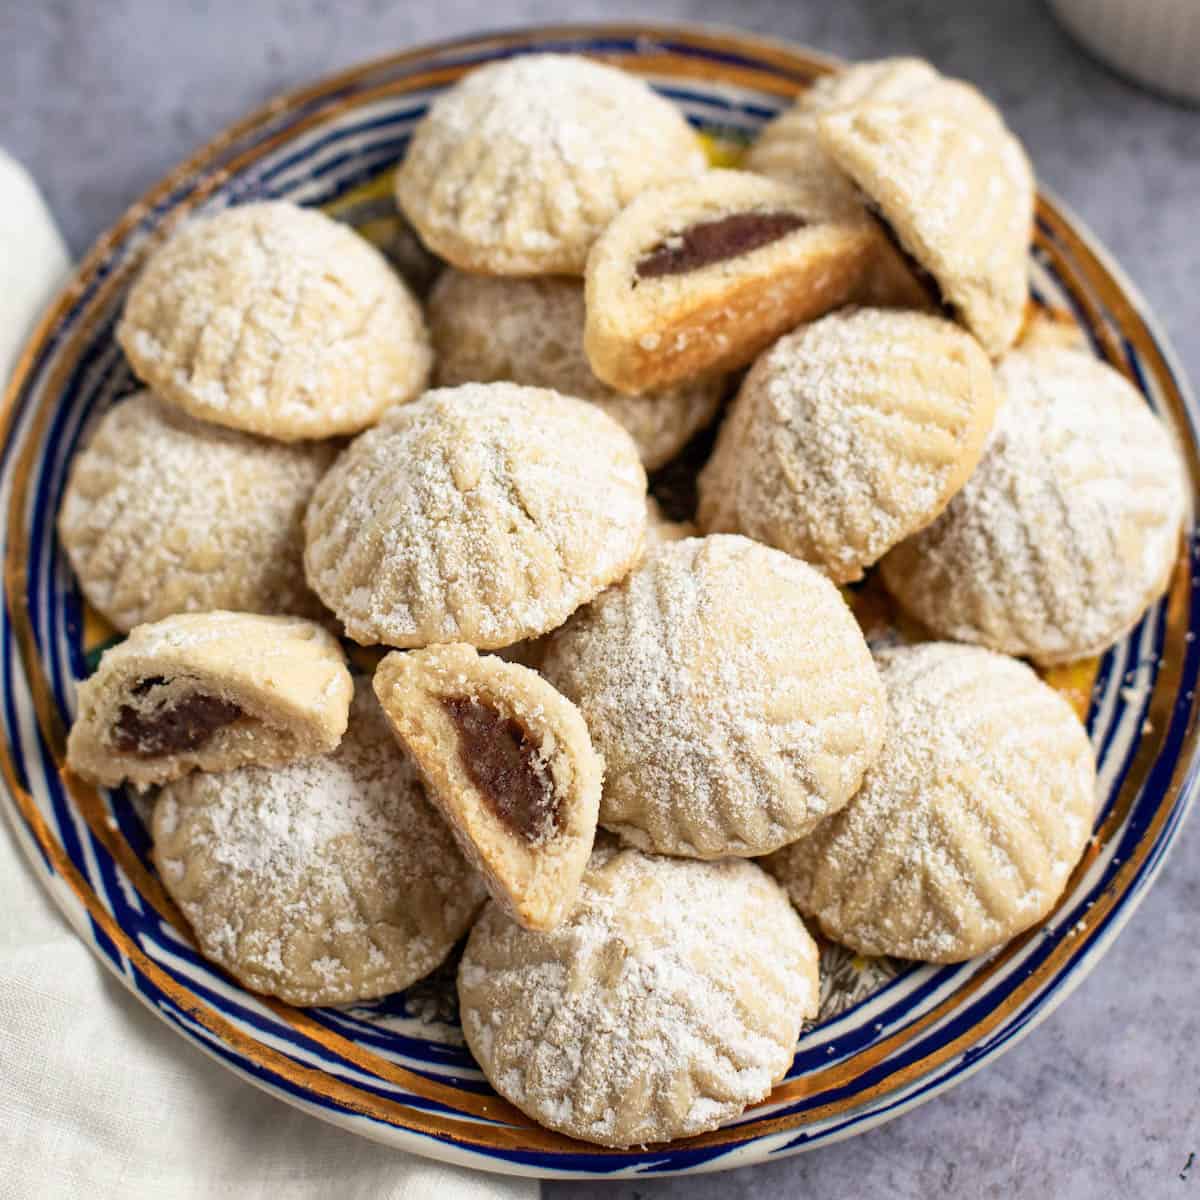 Date maamoul cookies on a plate.